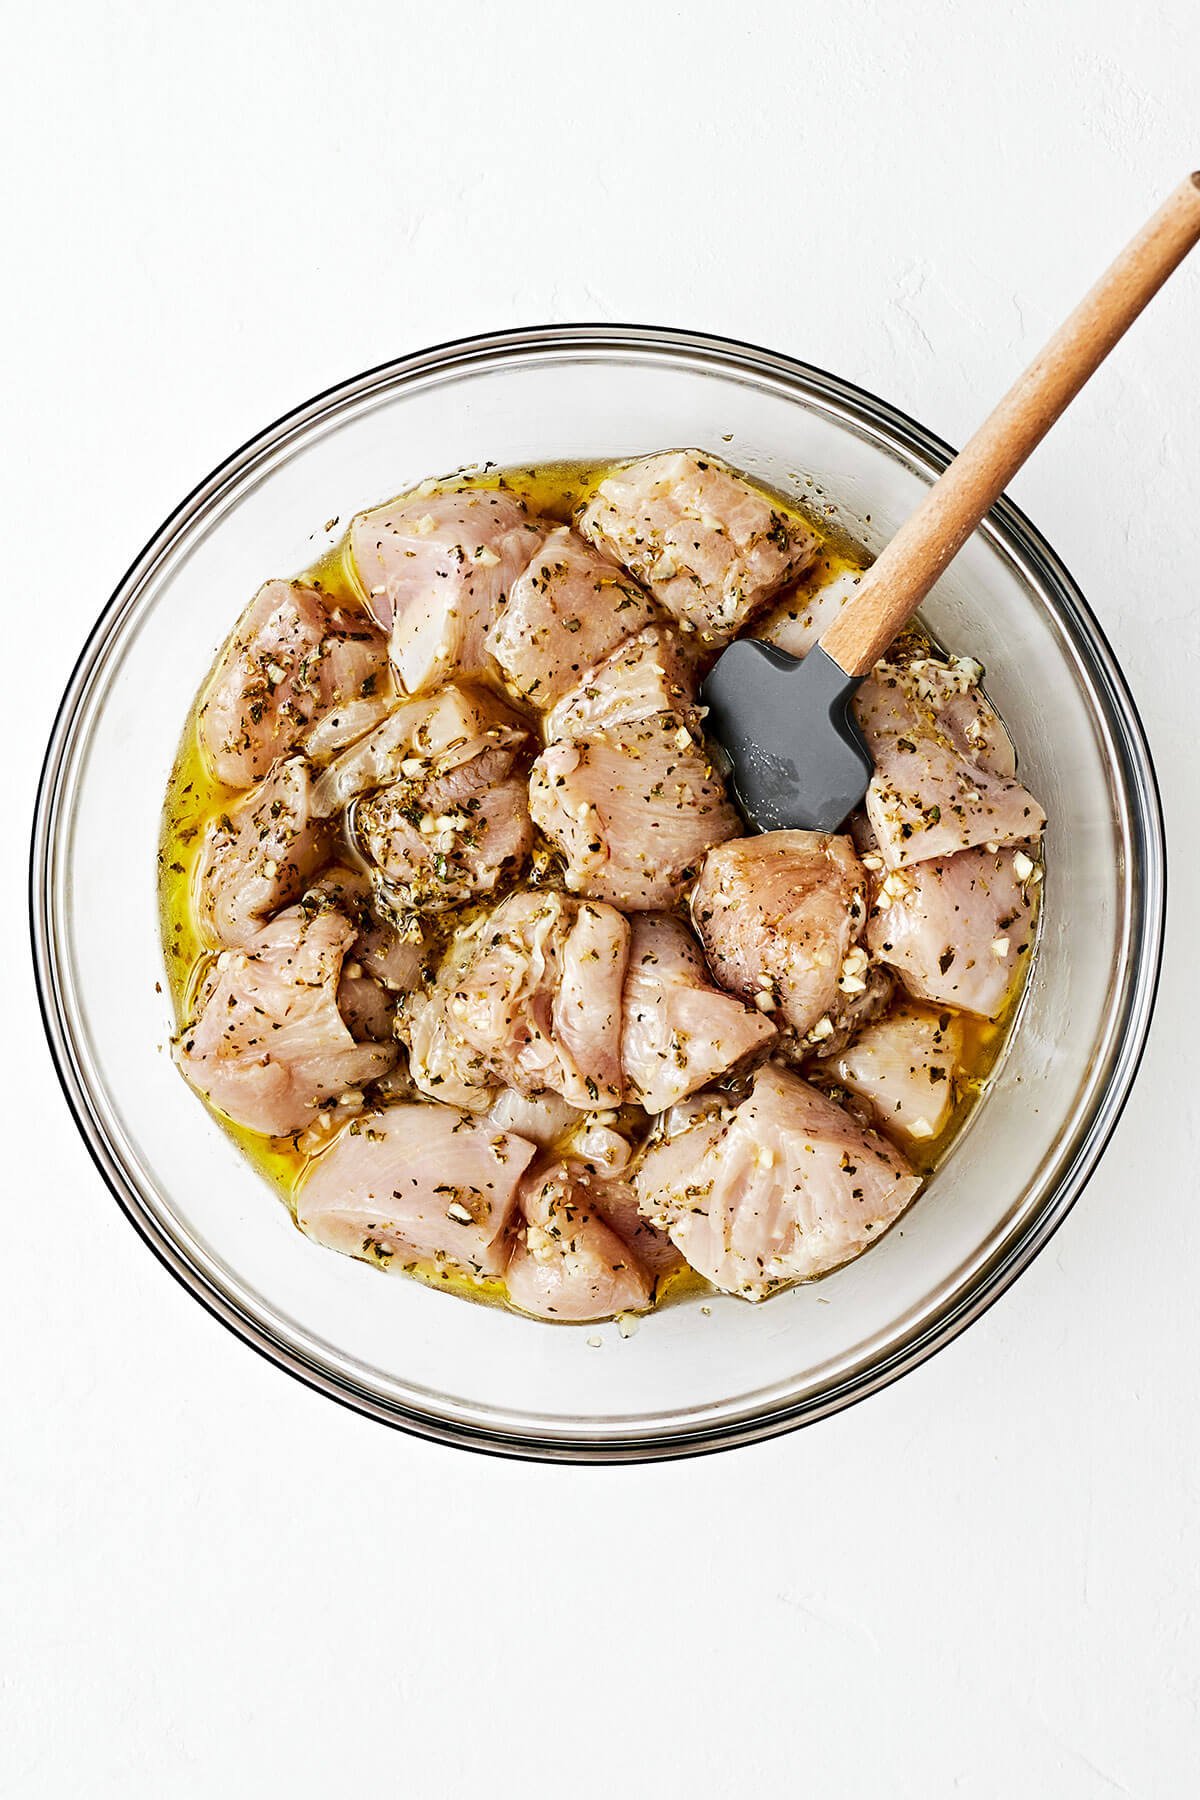 Chicken souvlaki being marinated in a bowl